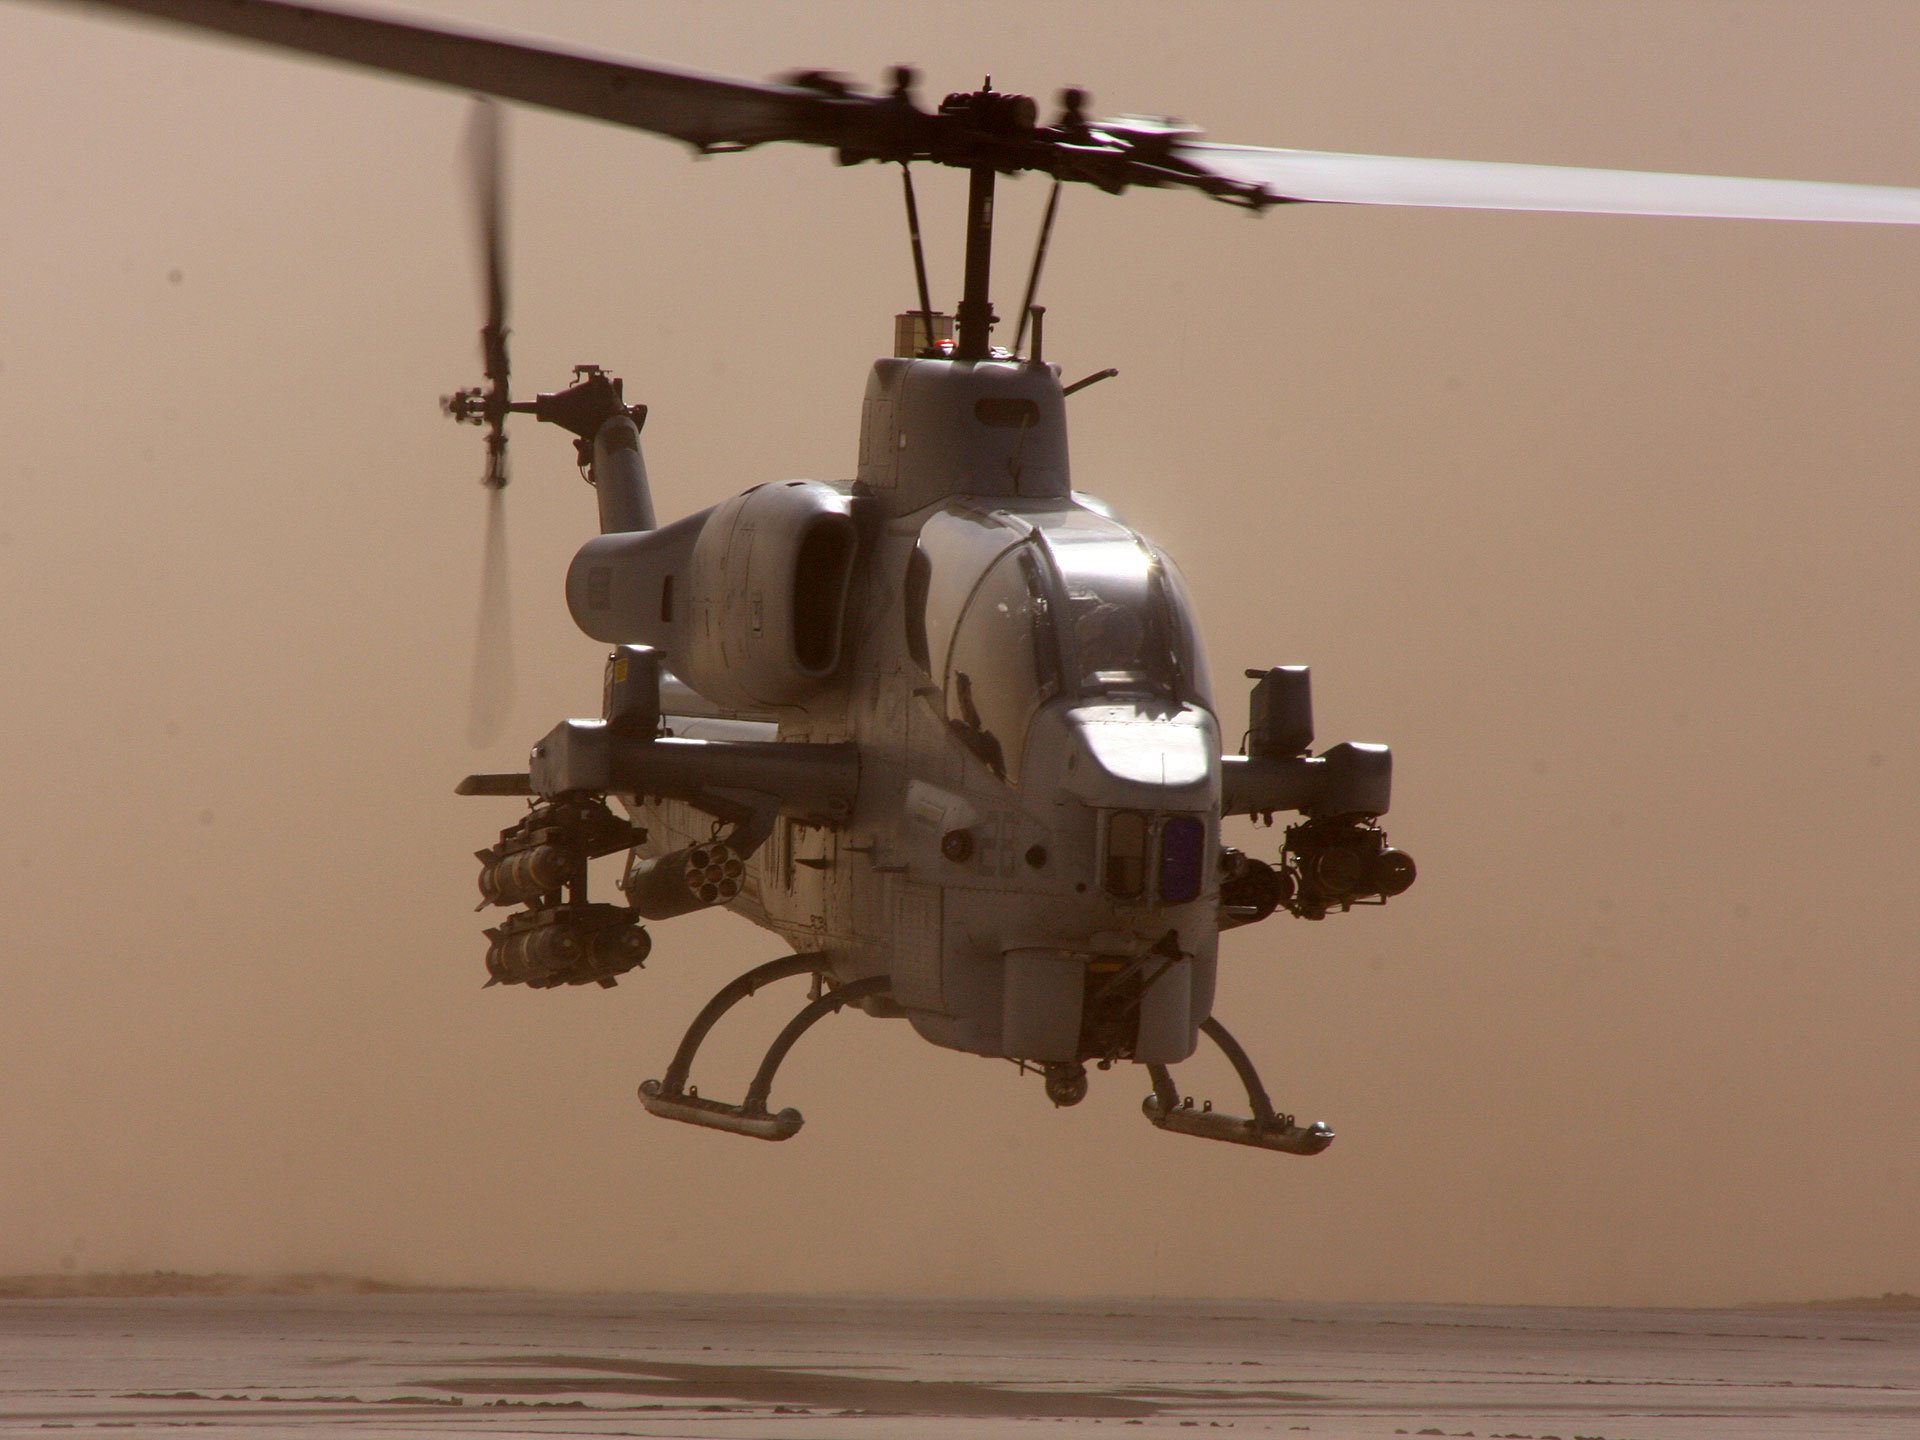 Super Cobra Attack Helicopter Military Weapon Aircraft Wallpaper